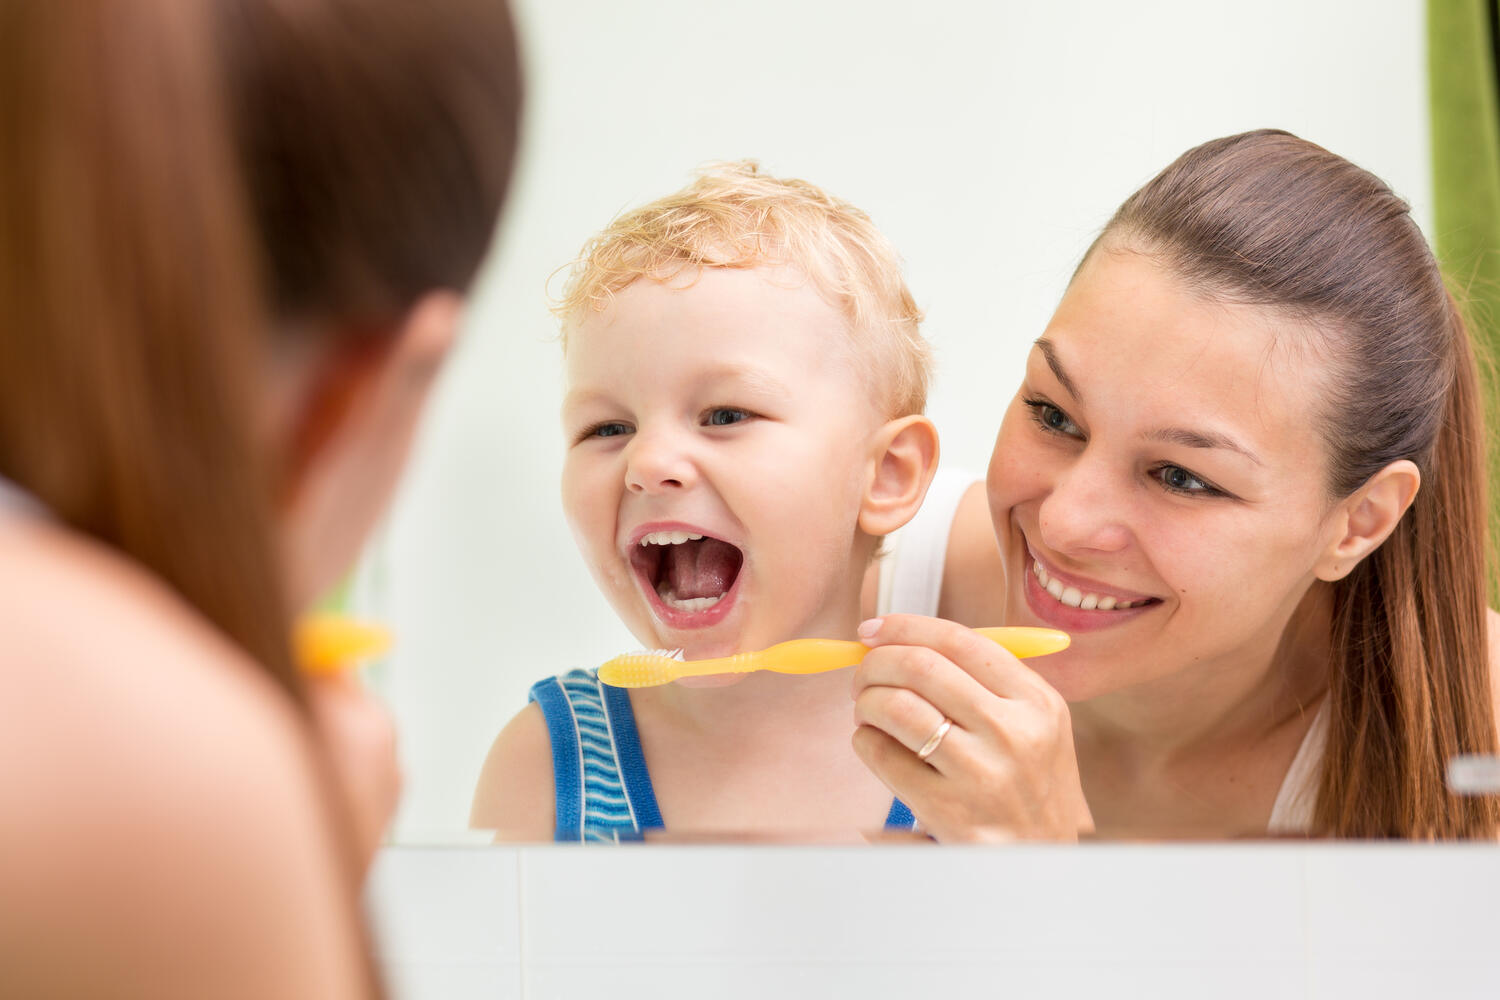 It is important to brush toddler's teeth